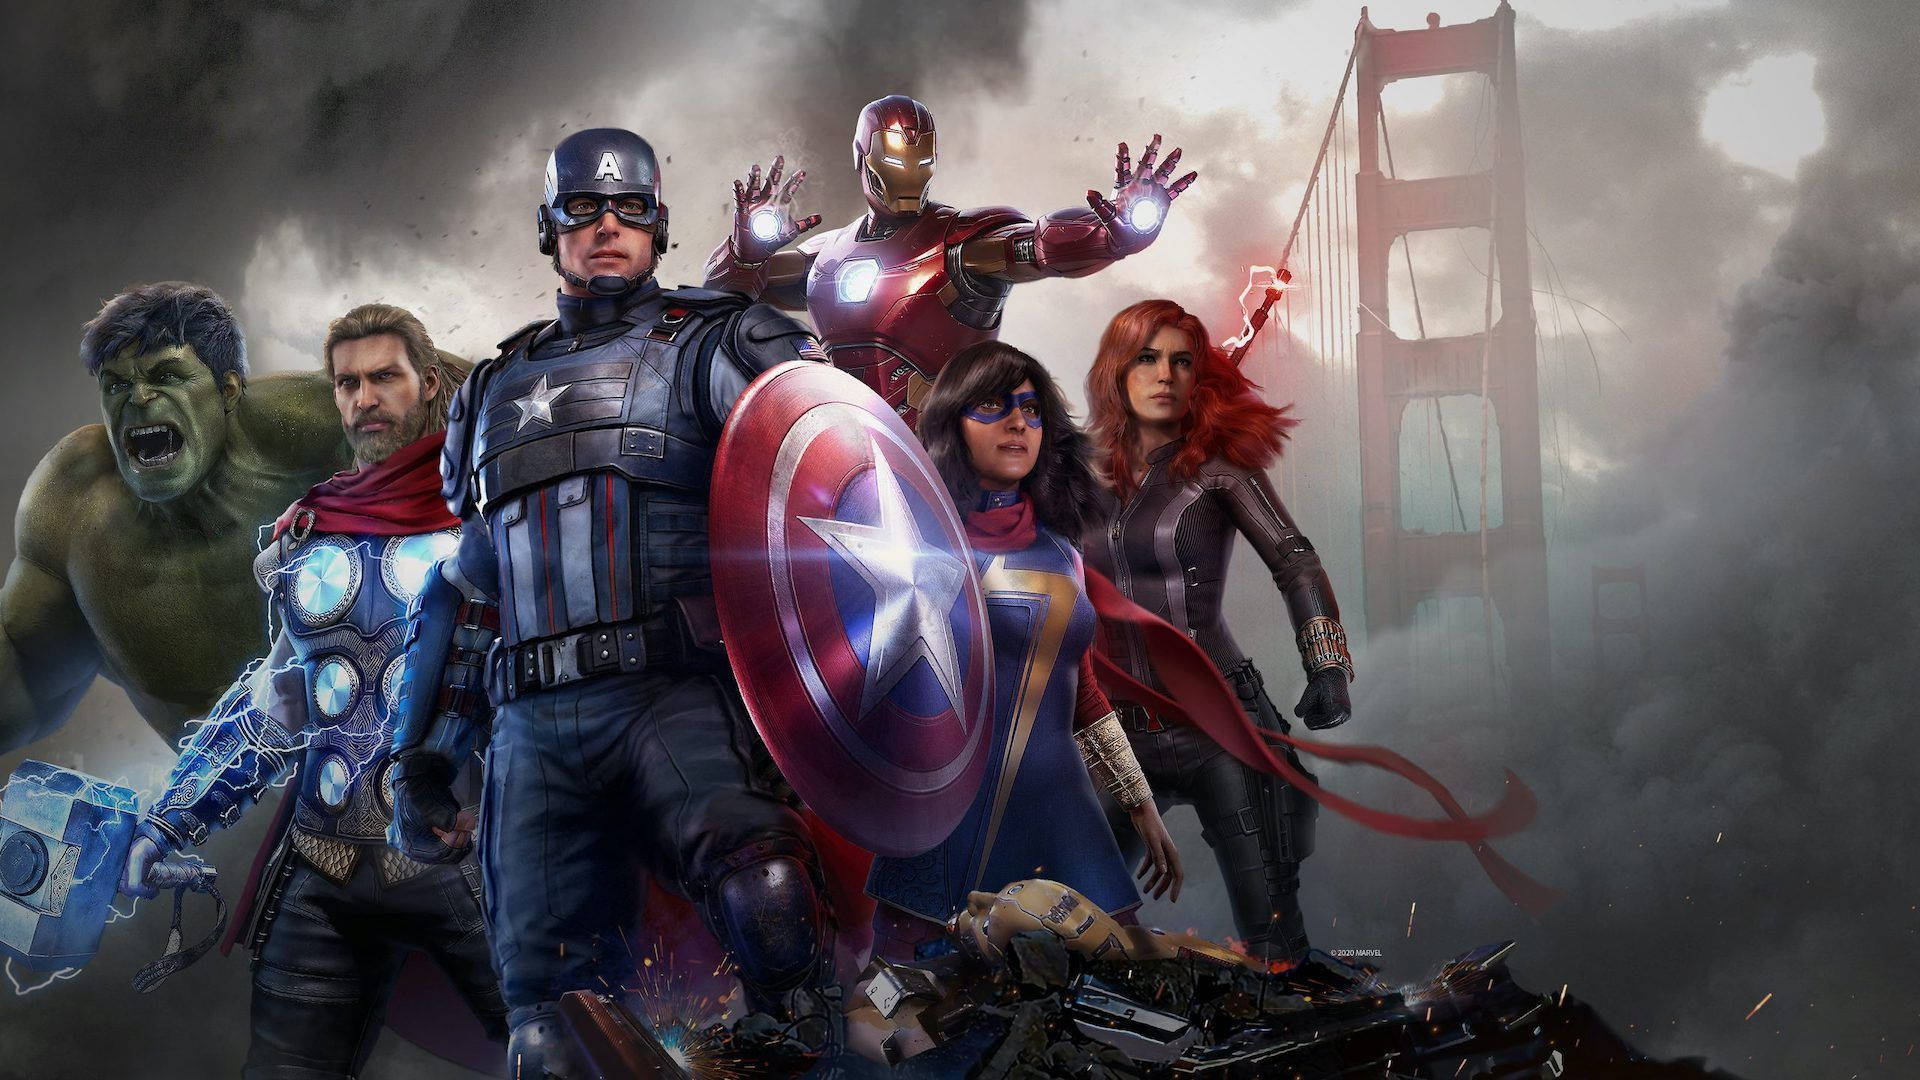 "Defend the world in style with the Avengers Playstaion game!" Wallpaper